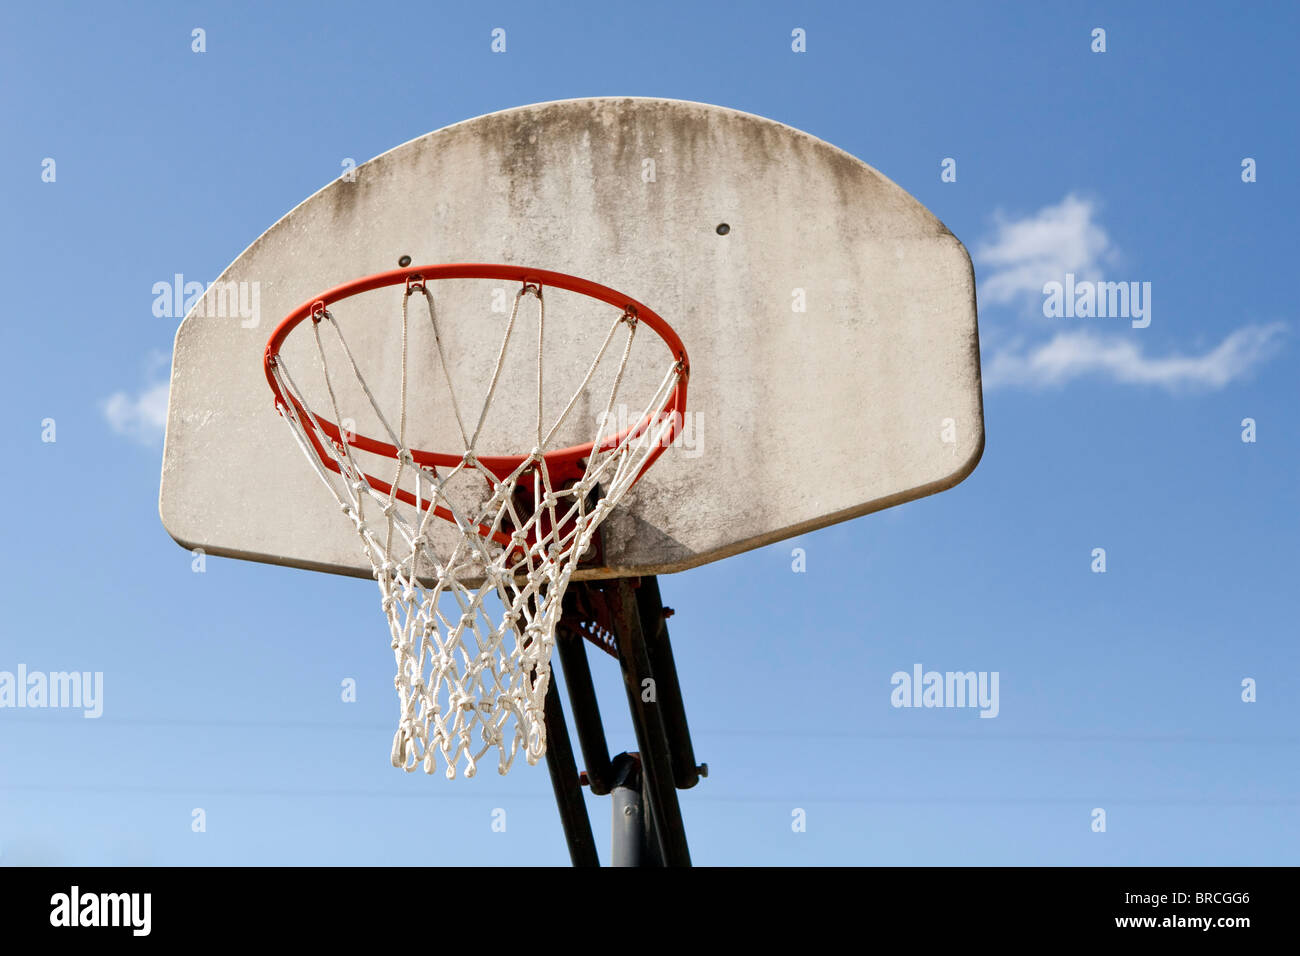 A weathered fiberglass basketball backboard, with attached rim and net  against a blue sky. Focus is on the rim and net Stock Photo - Alamy